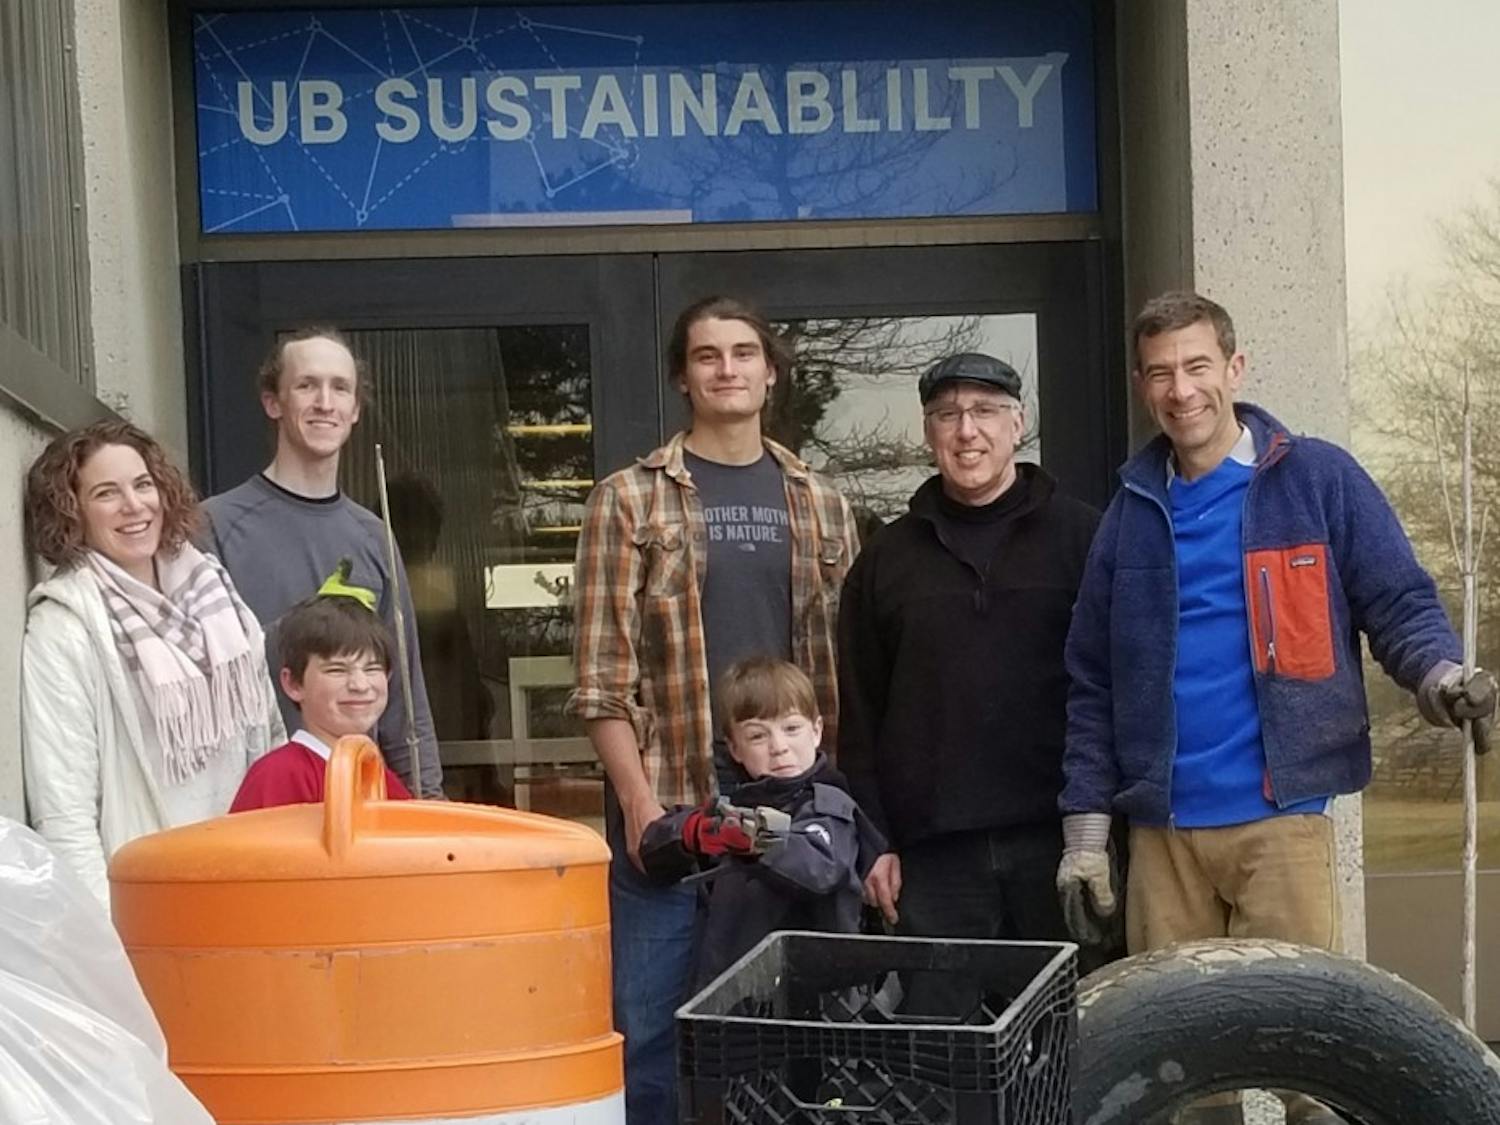 UB Sustainability organized a clean-up of Bizer Creek on Thursday, where volunteers cleaned roughly 500 pounds of garbage from the creek.